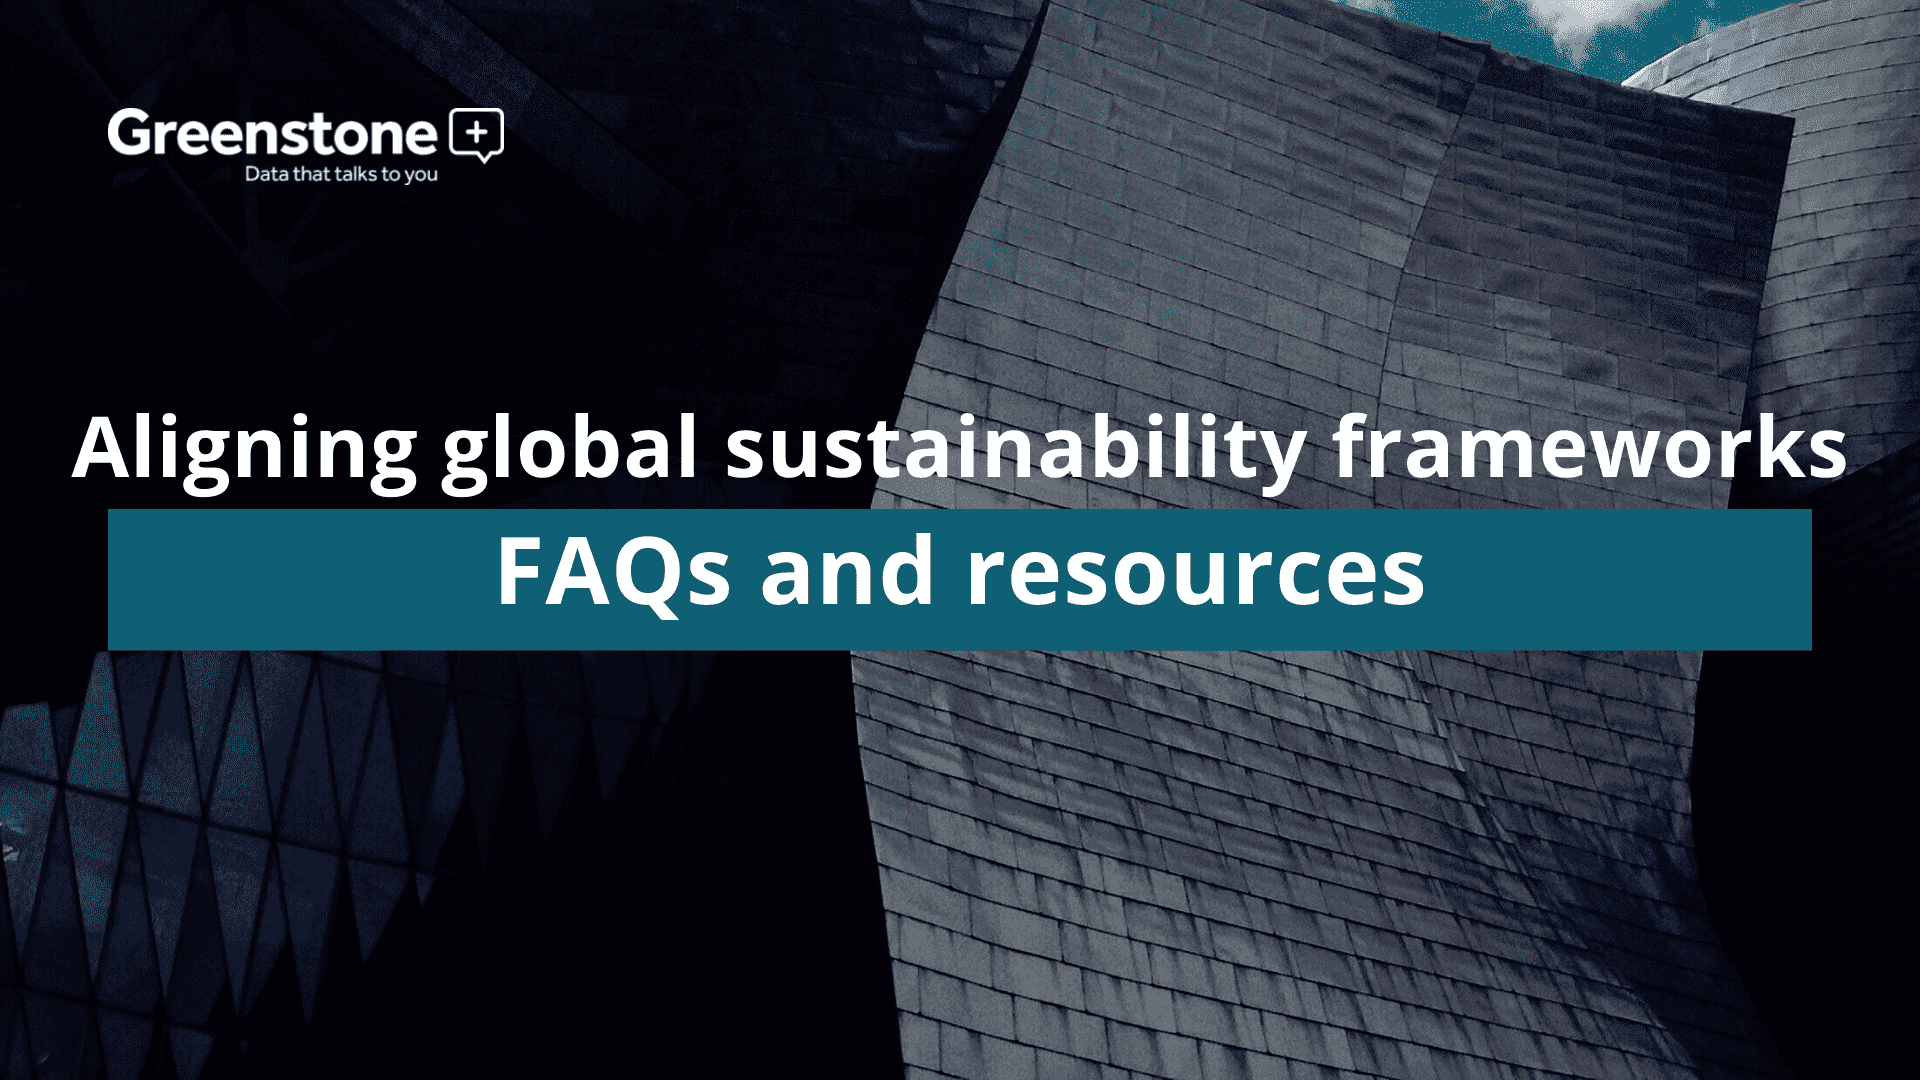 Aligning global sustainability frameworks - FAQs and resources